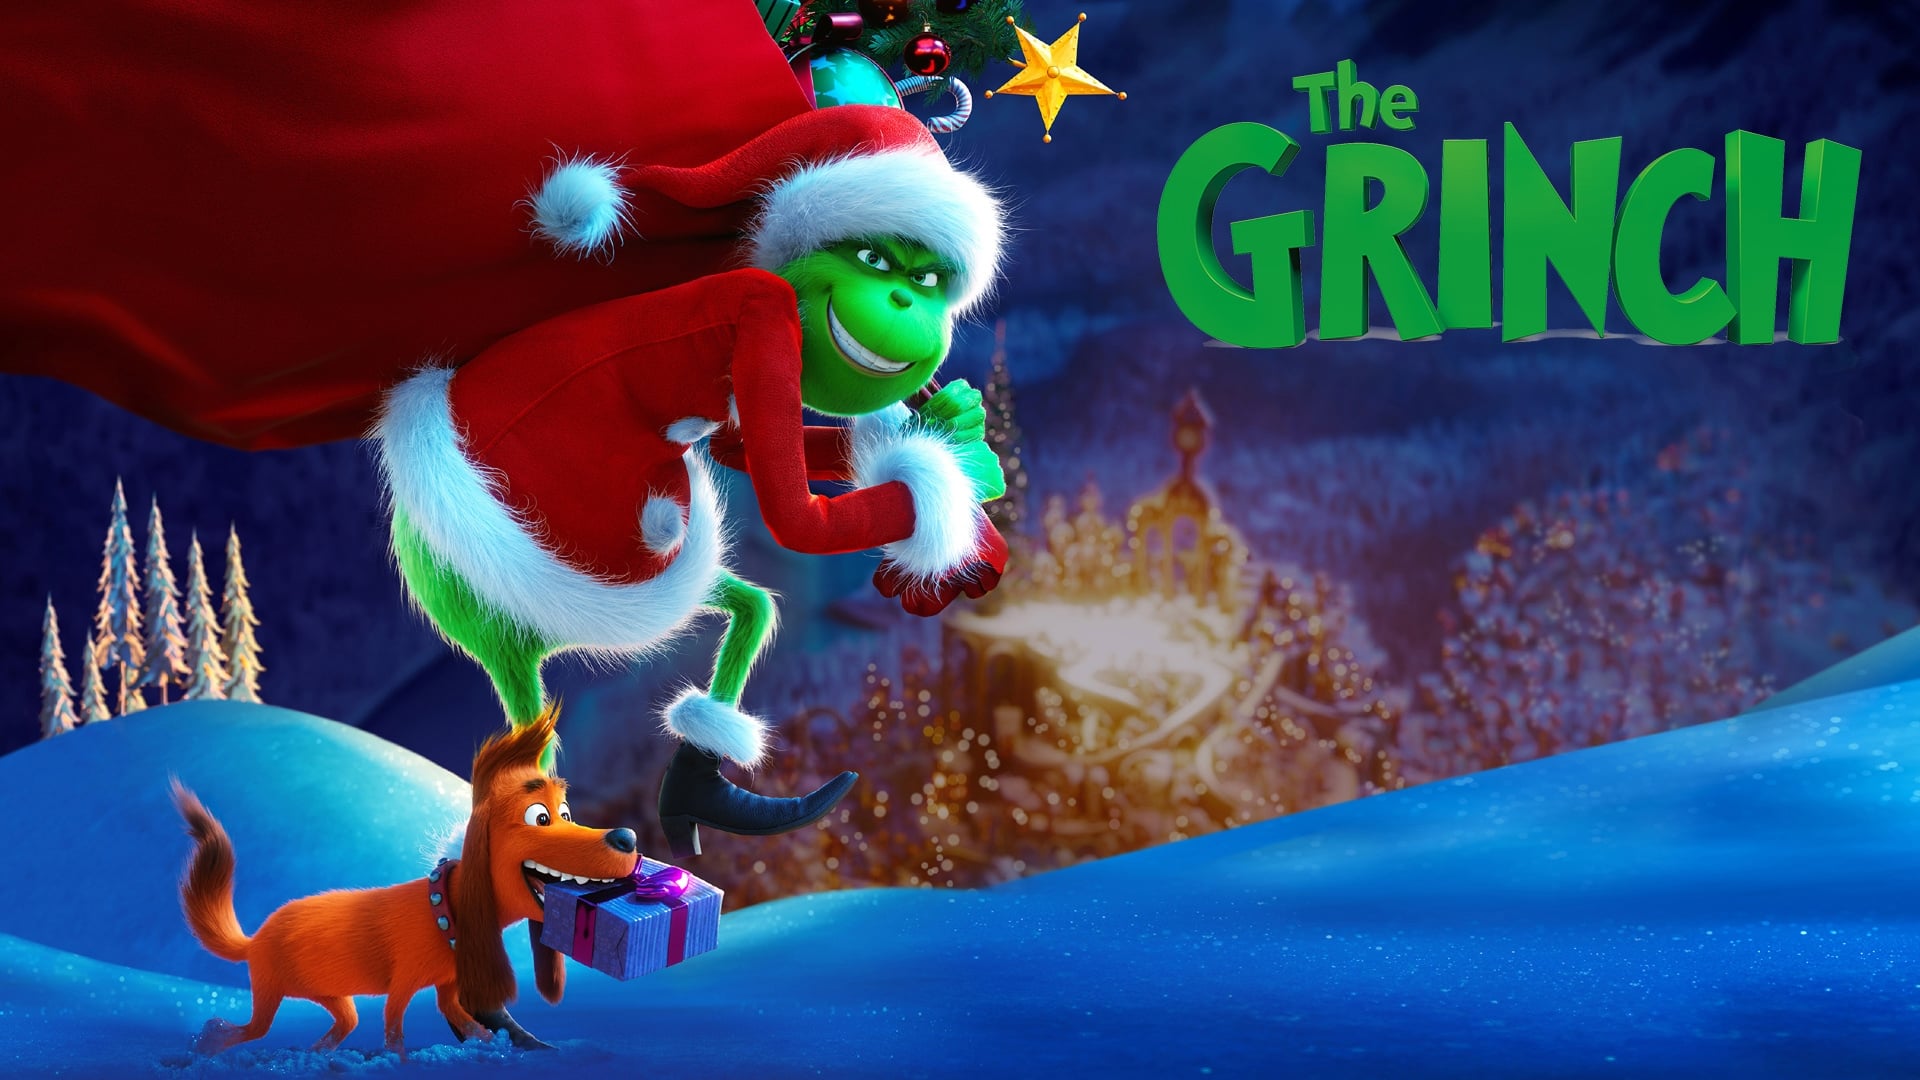 The Grinch christmas movie